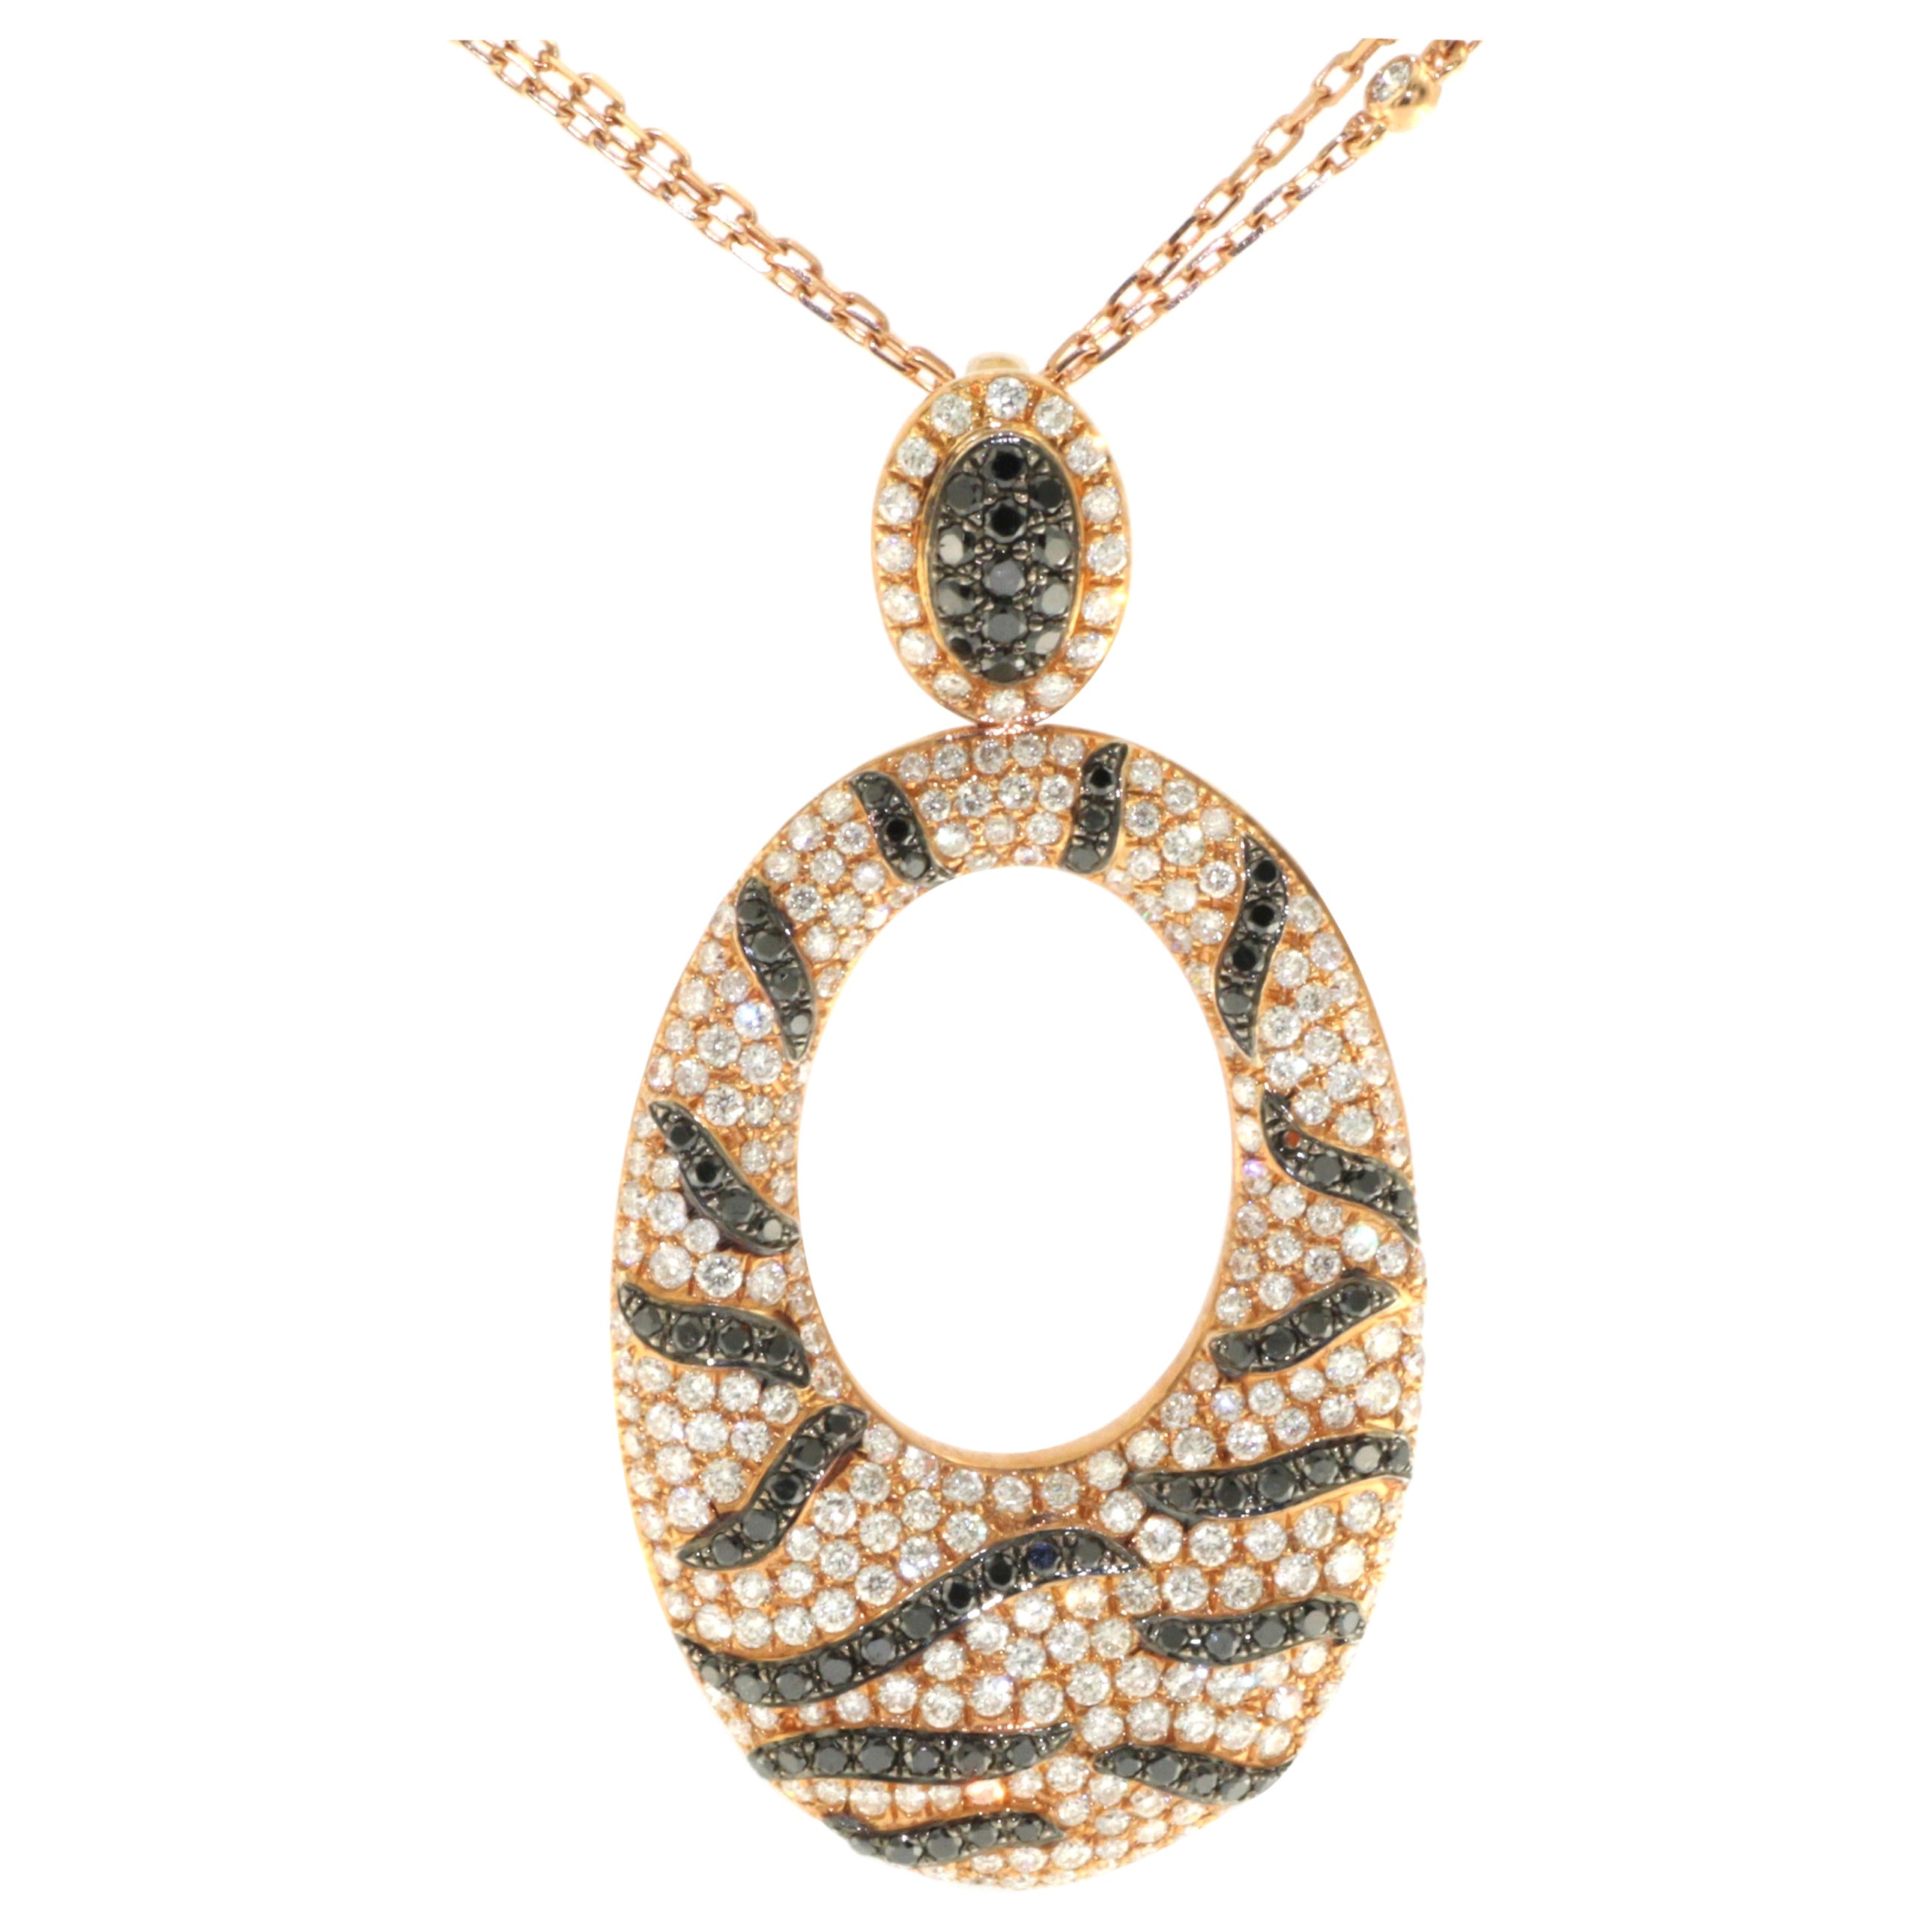 3.83 T.C.W White and Black Diamonds Pendant with Chain in 18 Karat Rose Gold